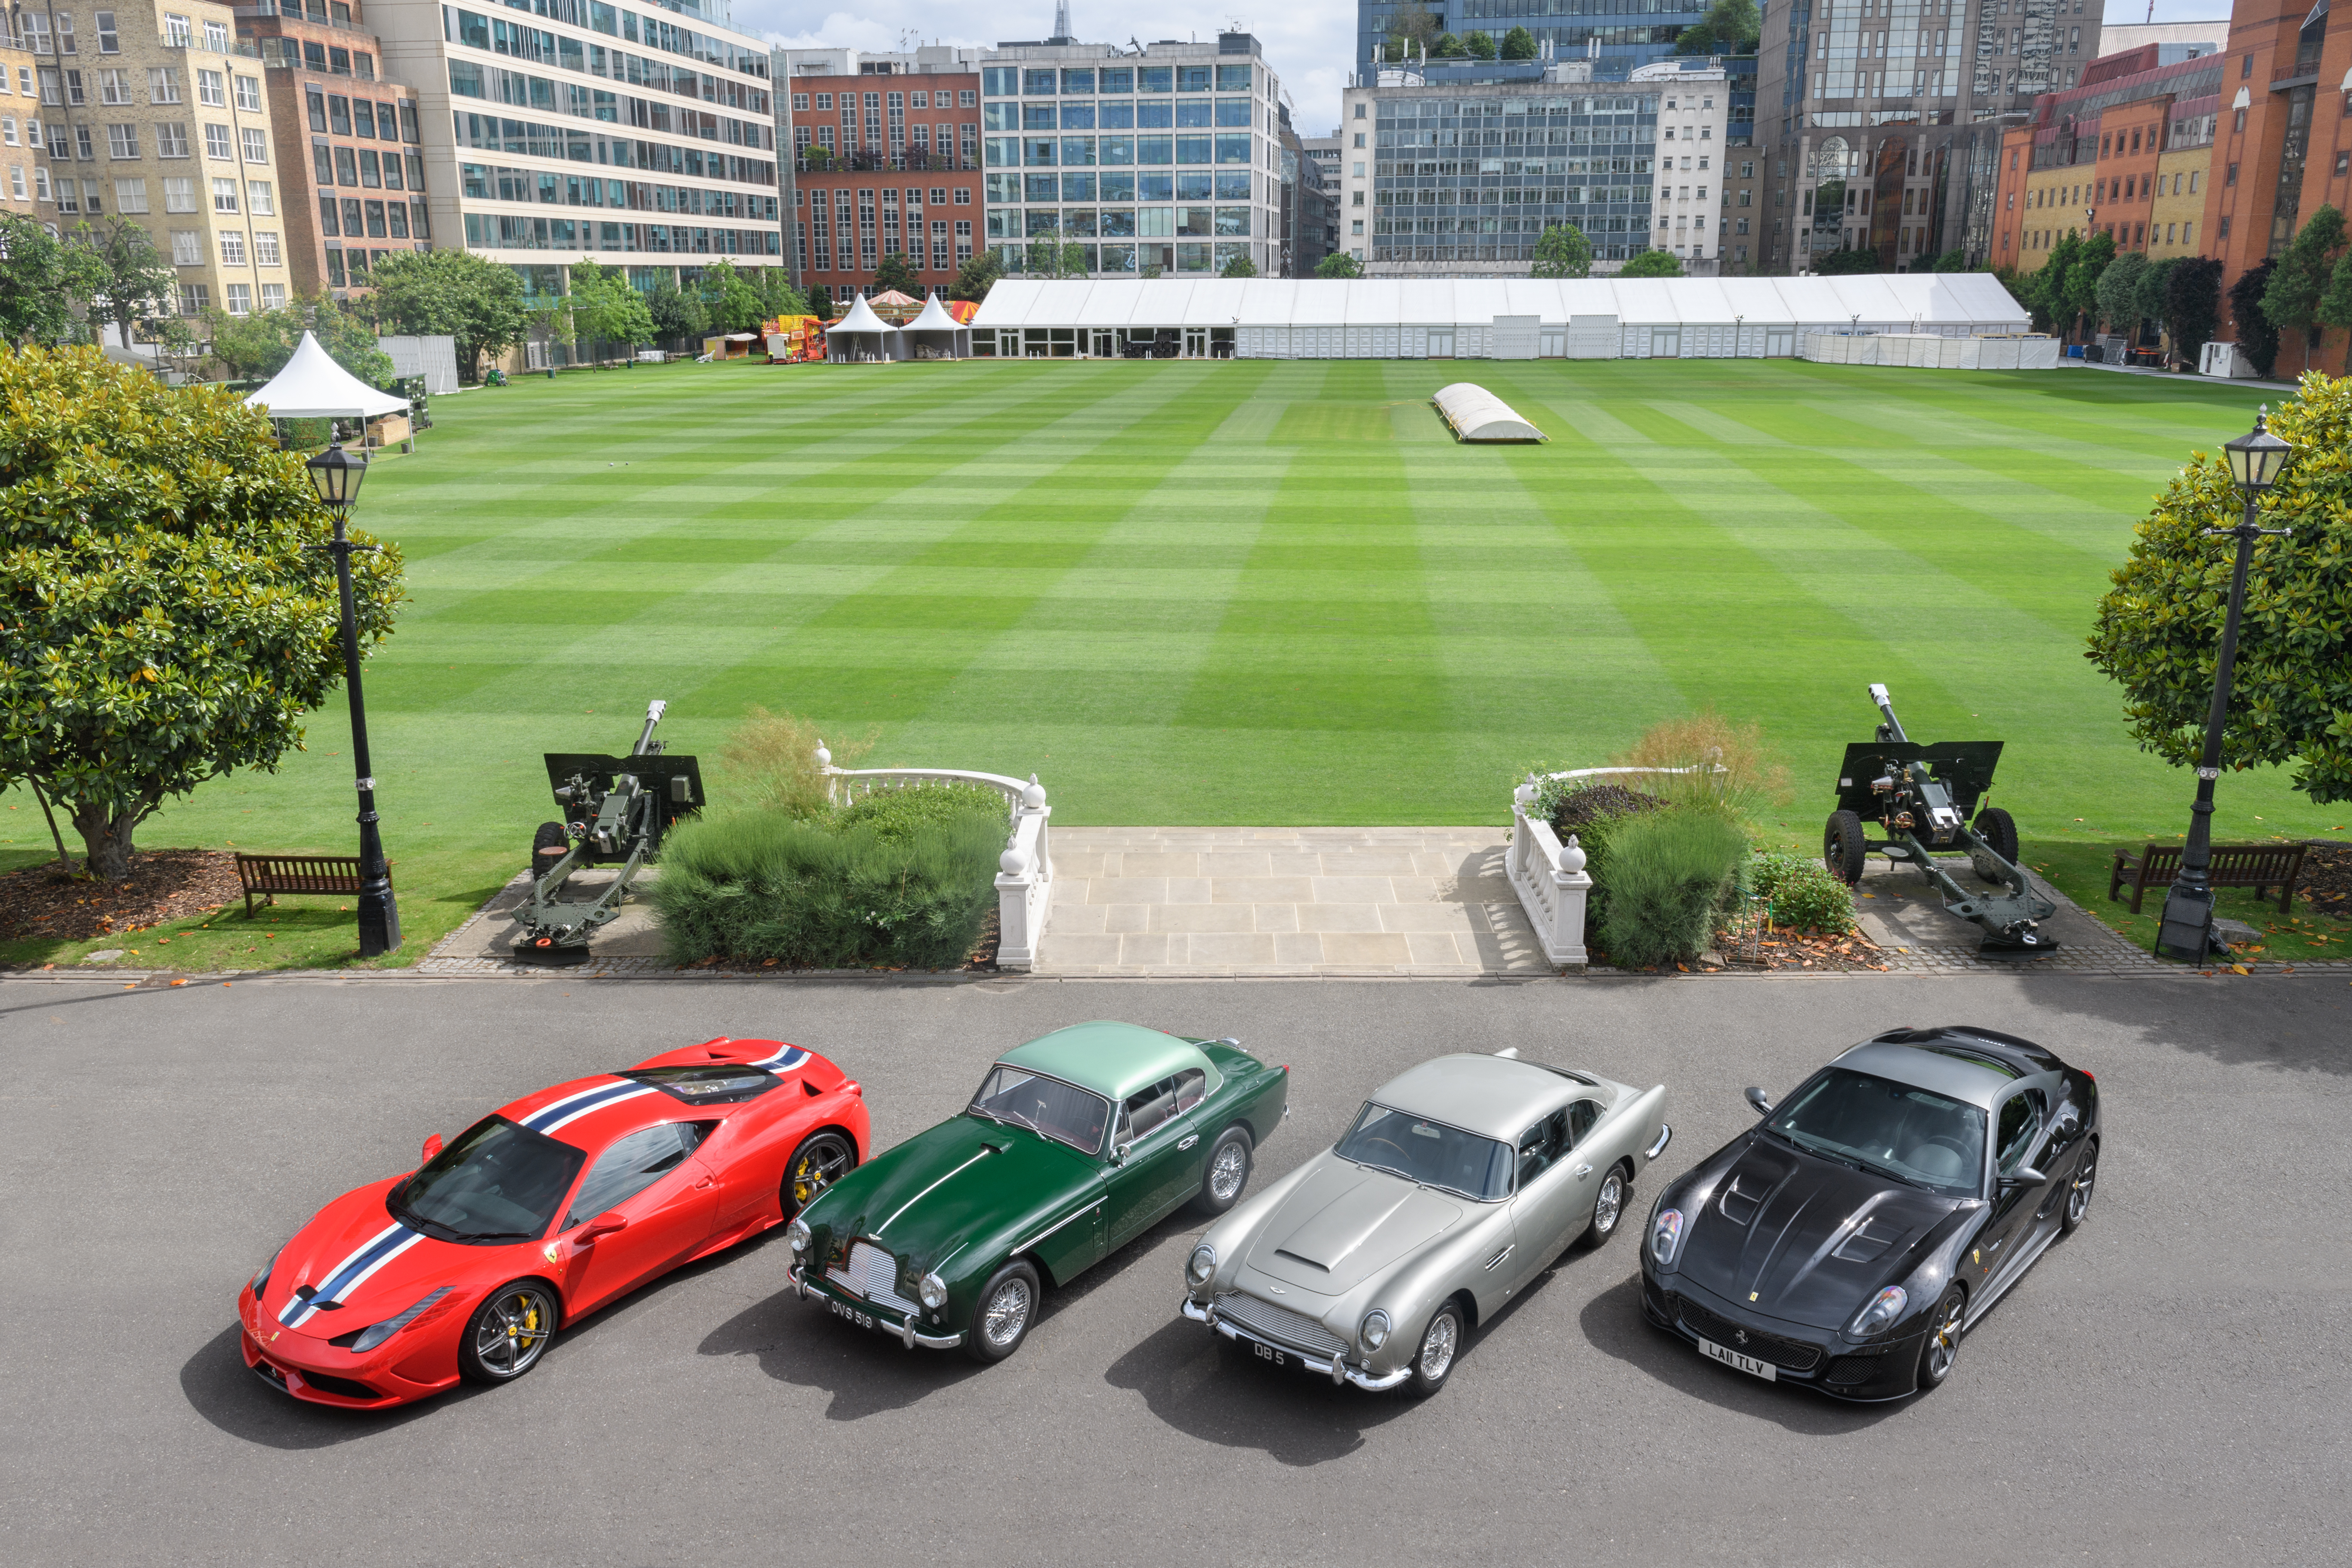 The Most Incredible Cars in the World For Sale at the City Concours